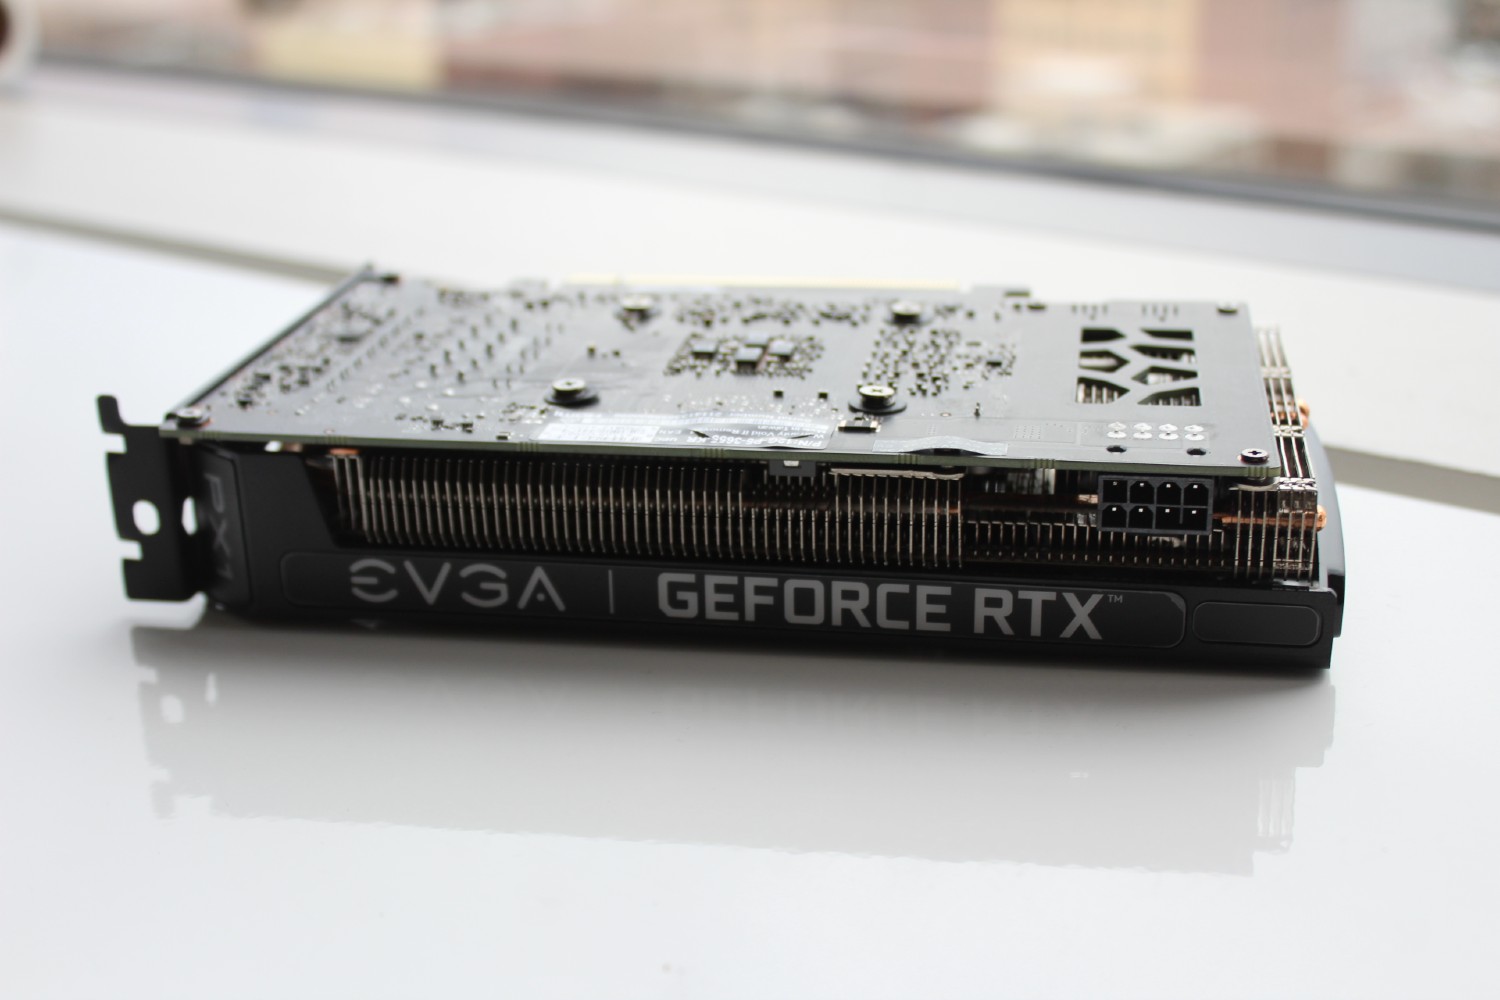 EVGA RTX 3060 graphics card laying on a table.